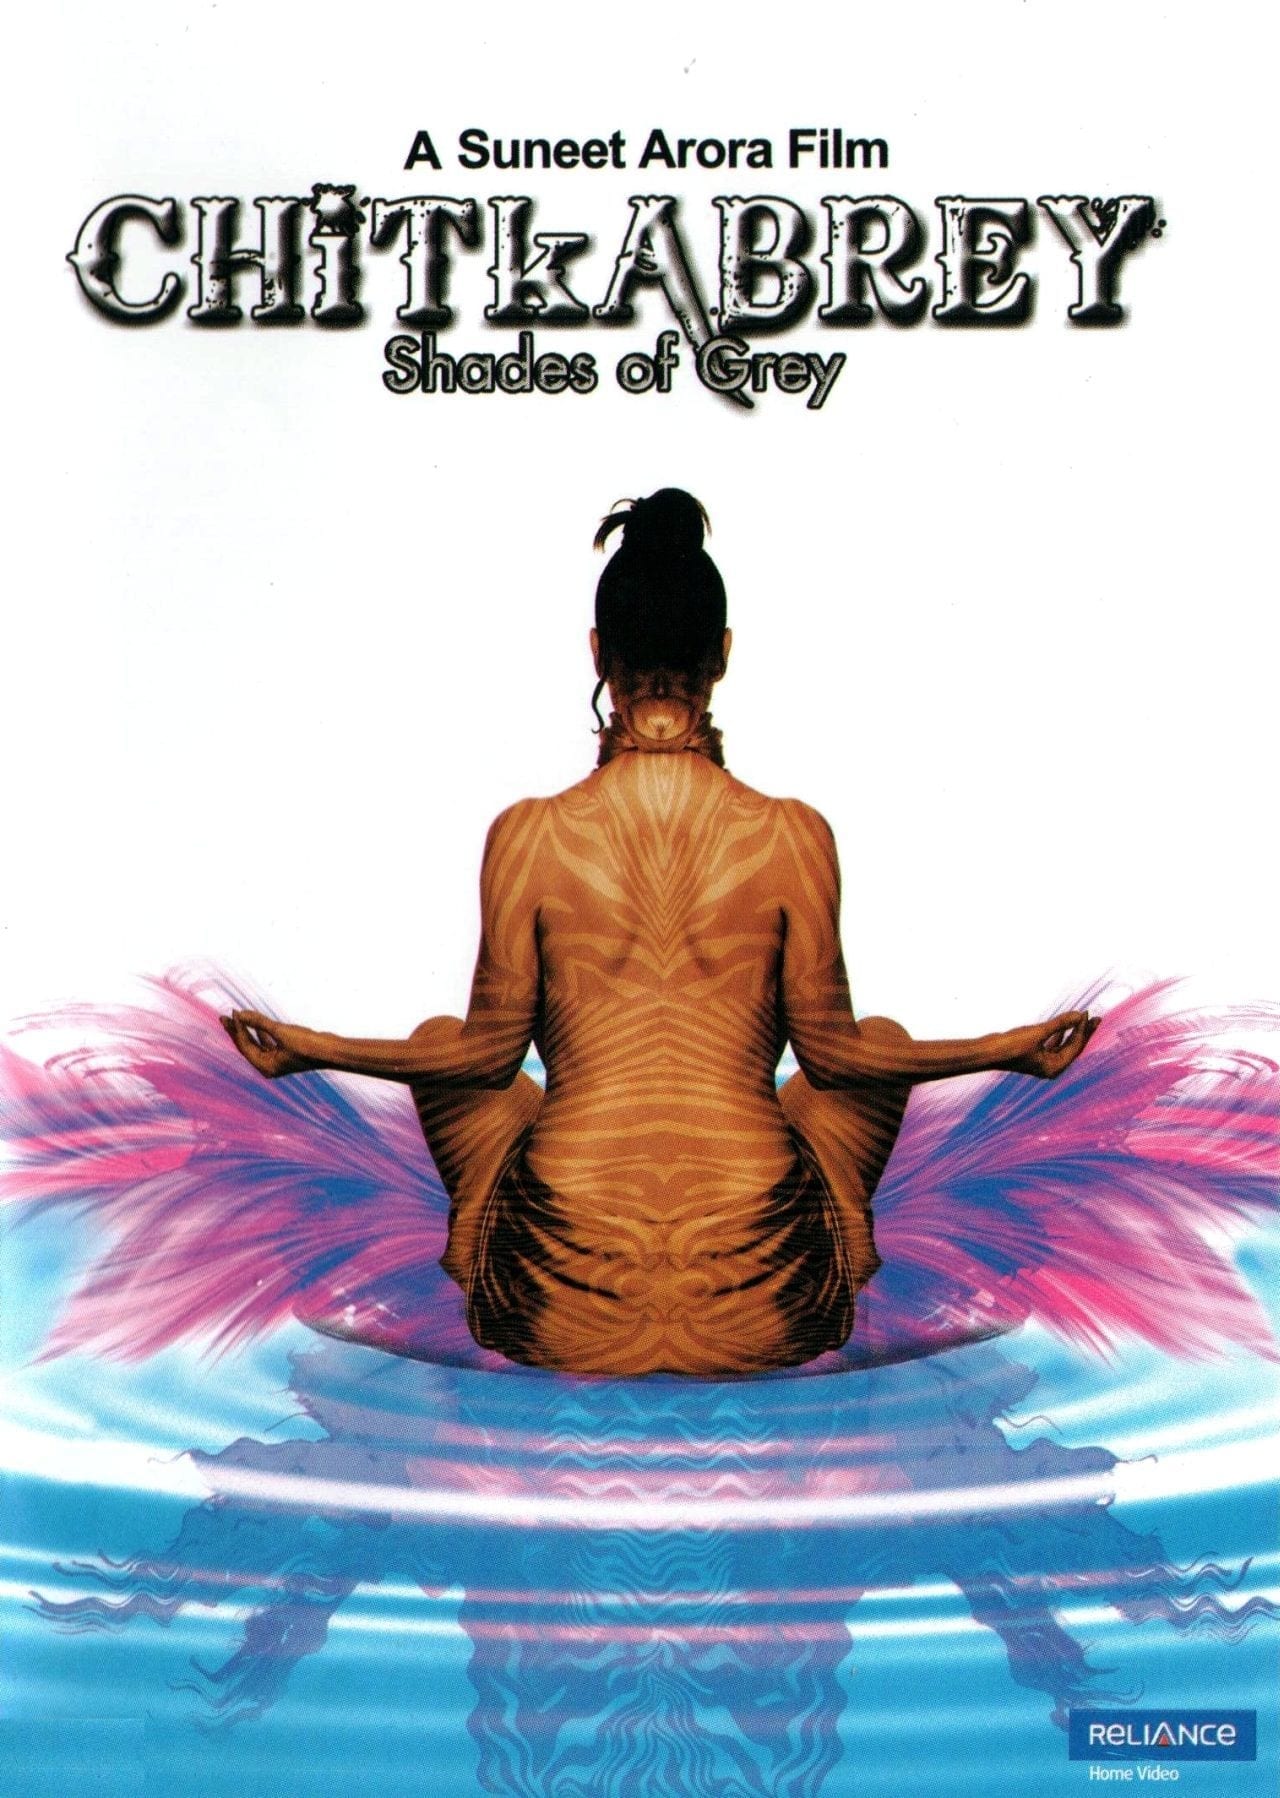 Poster for the movie "Chitkabrey"